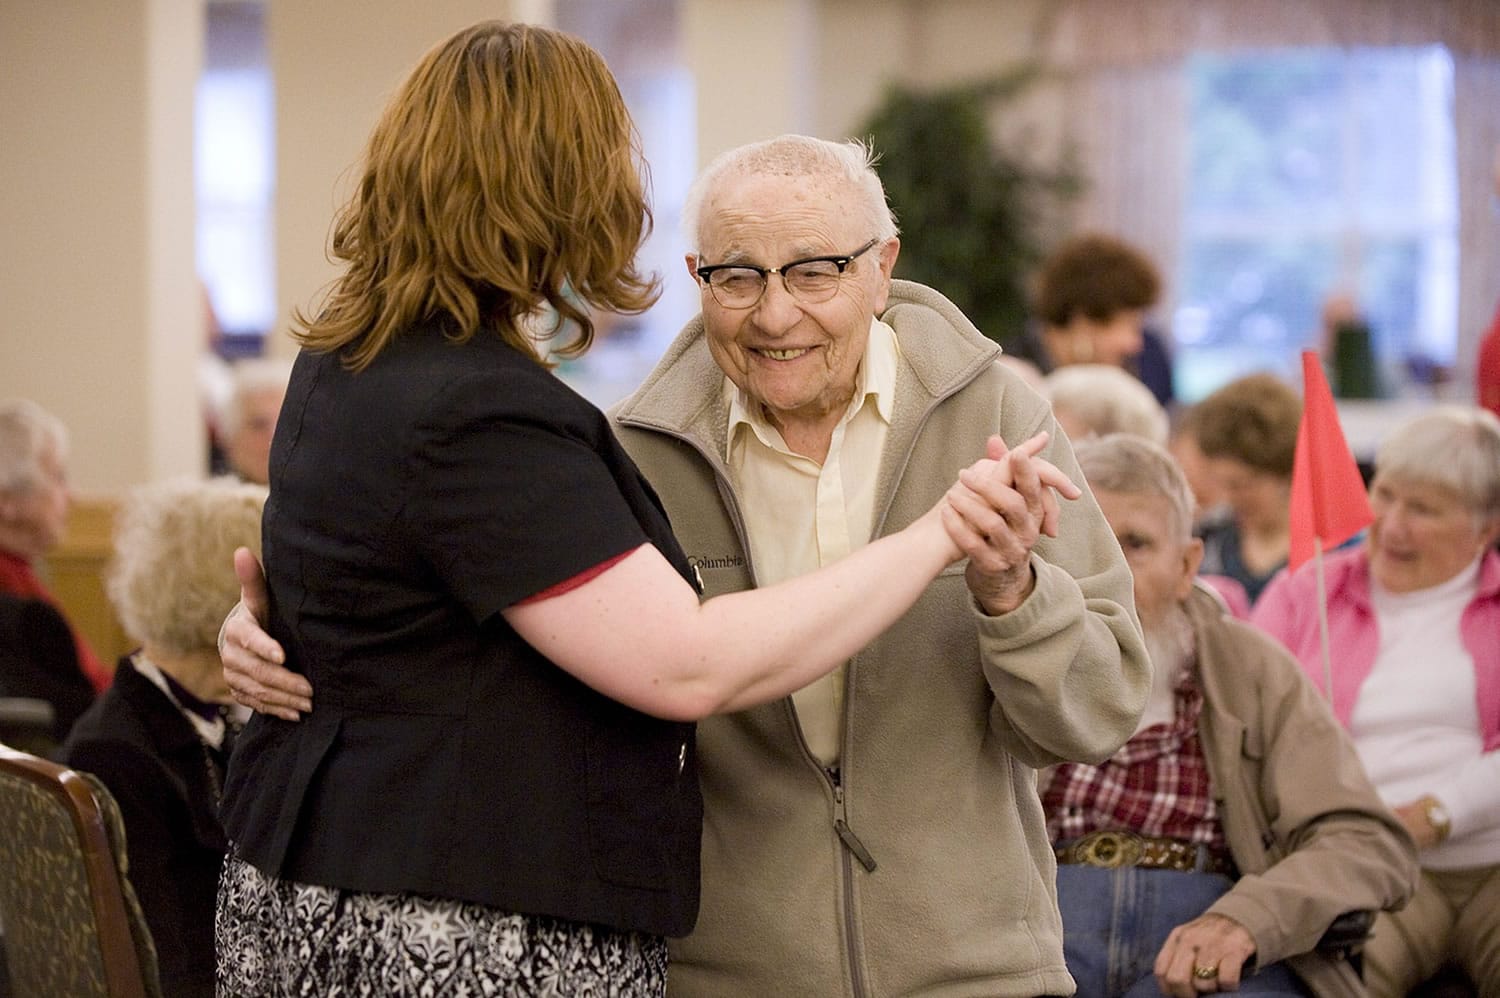 Resident Rocky Cortese, 94, dances with activities director Michelle Avdienko during a wine and cheese social hour at Vancouver's Glenwood Place Senior Living. Research suggests older people are happier than younger ones.